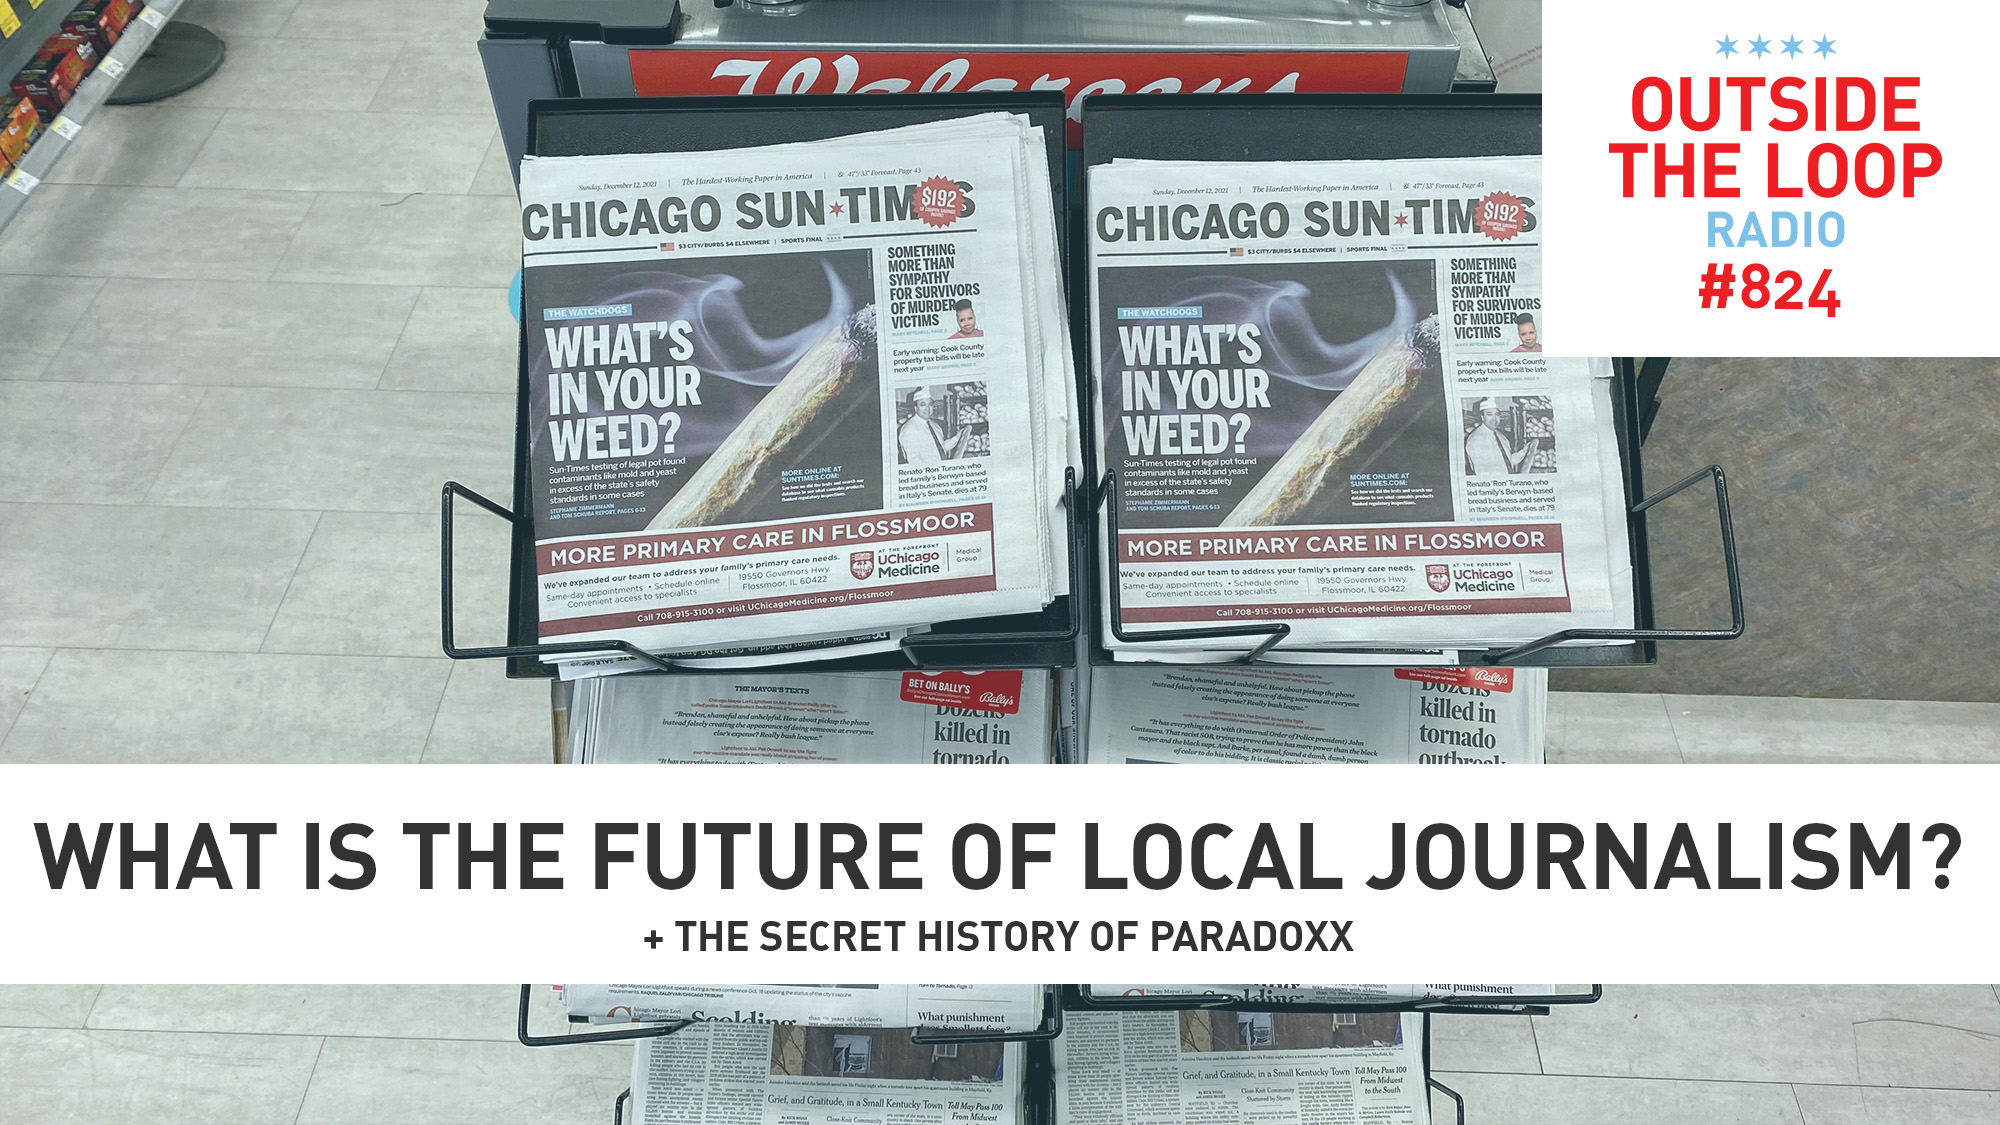 What is the future of local journalism? (Photo credit: Mike Stephen/WGN Radio)